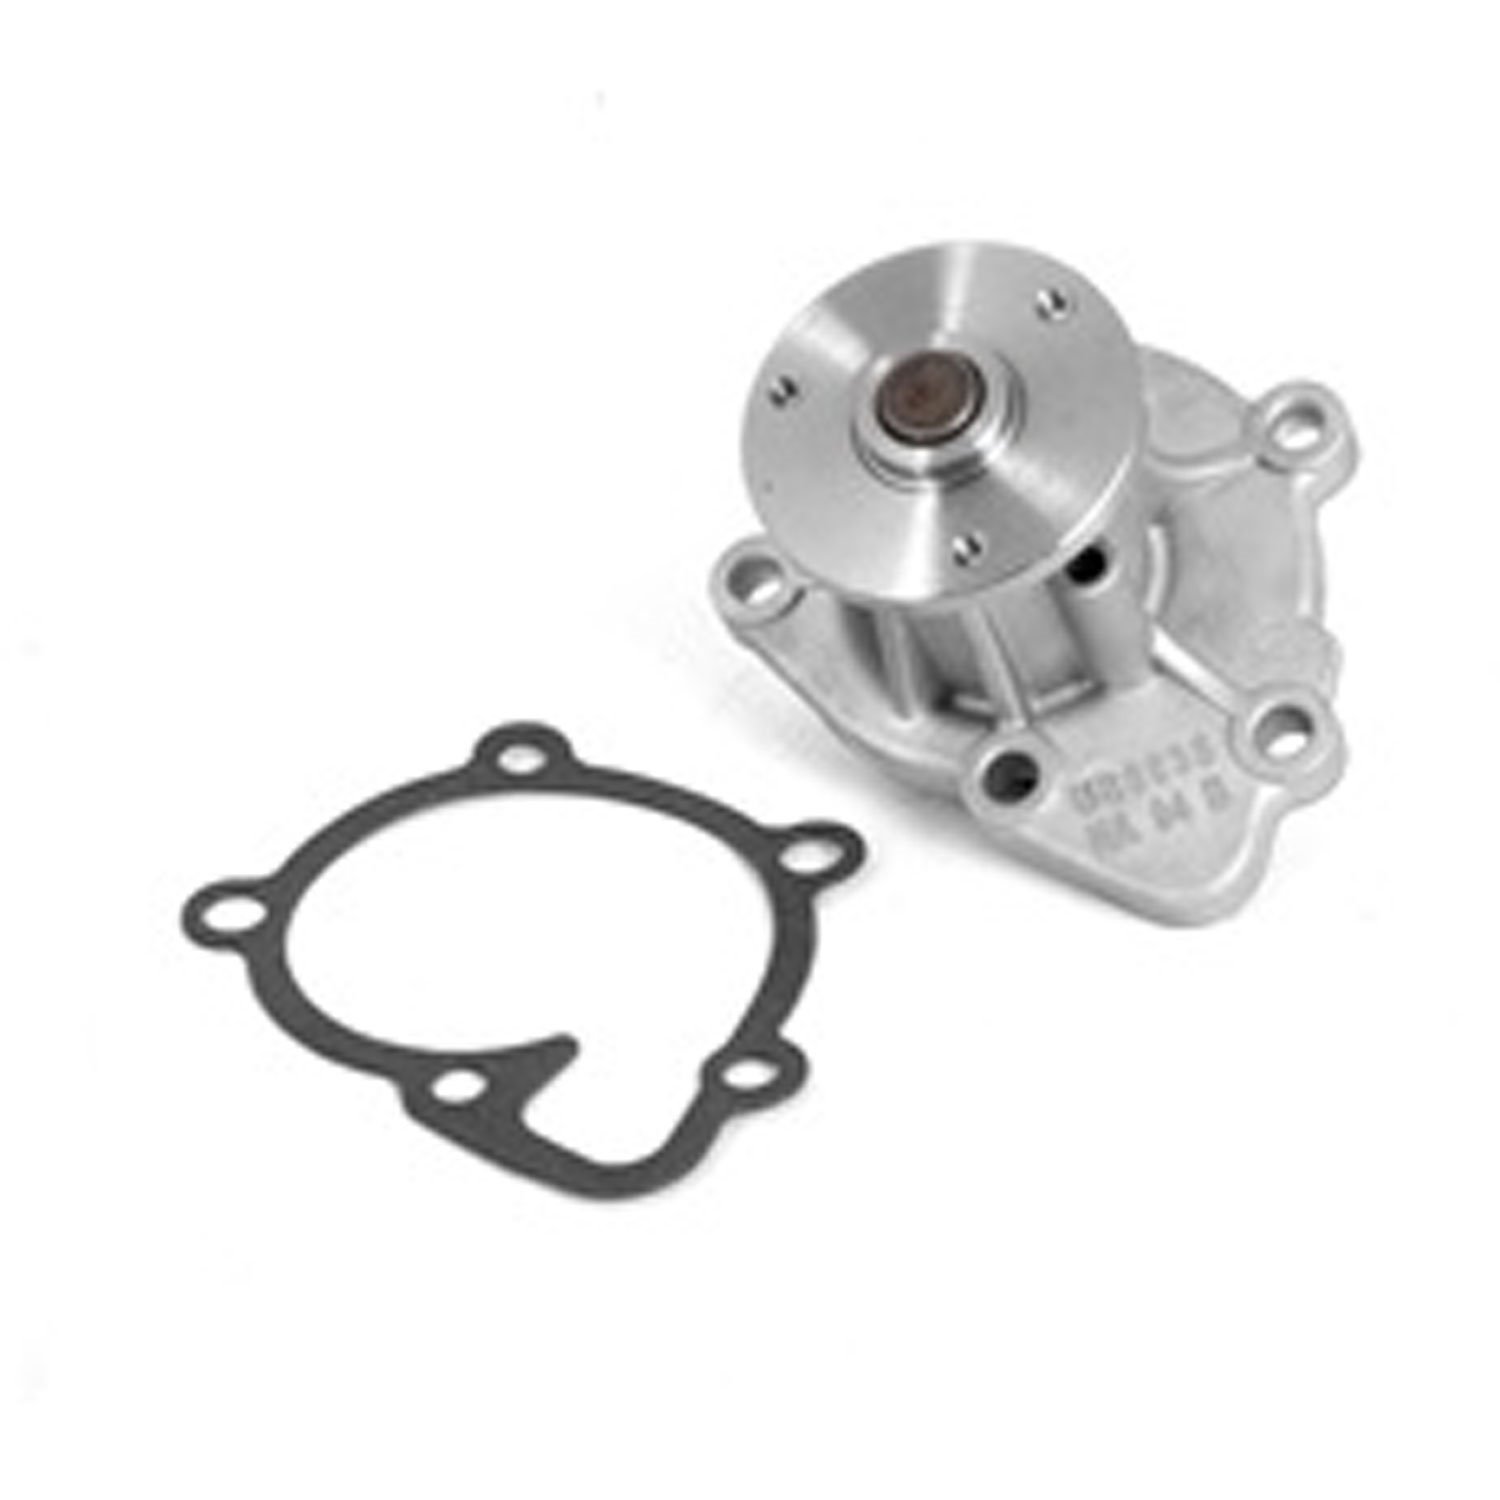 This water pump from Omix-ADA fits the 2.0L